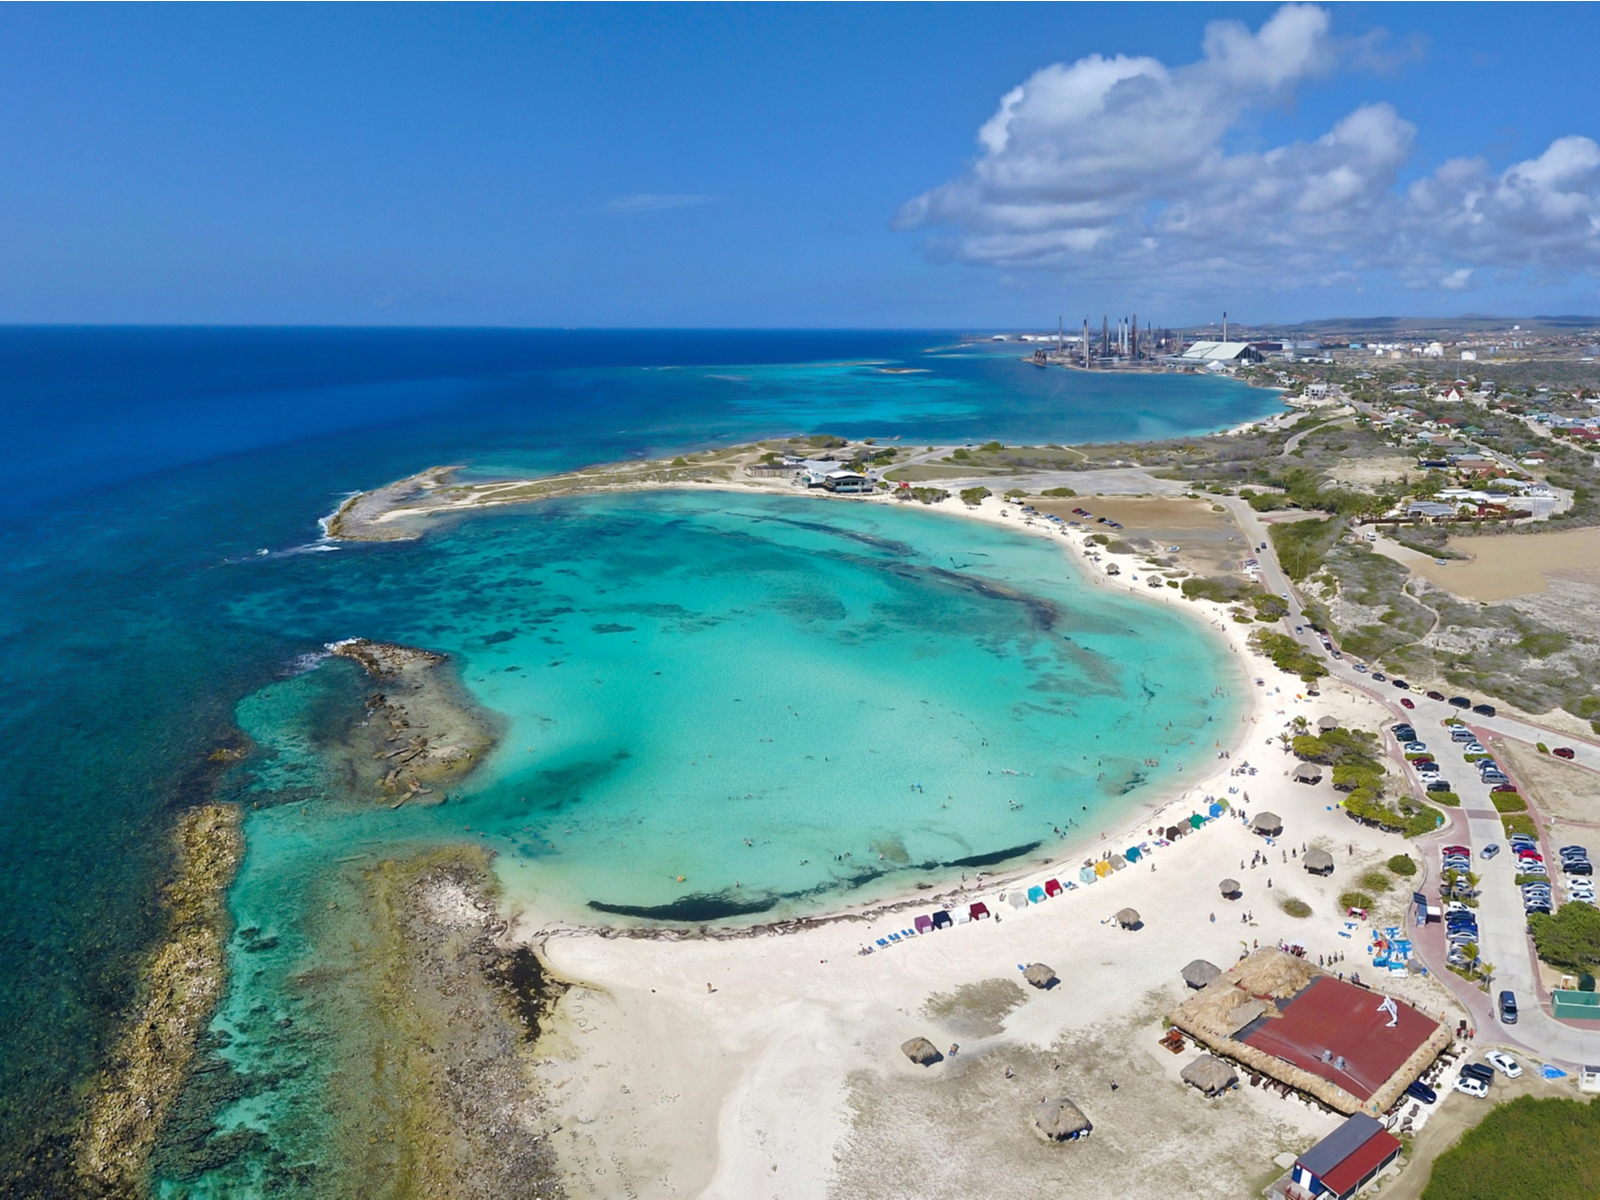 Aerial view of the beautiful curve man-made lagoon with shallow waters on Baby Beach, one of the best beaches in Aruba, and coast on Aruba